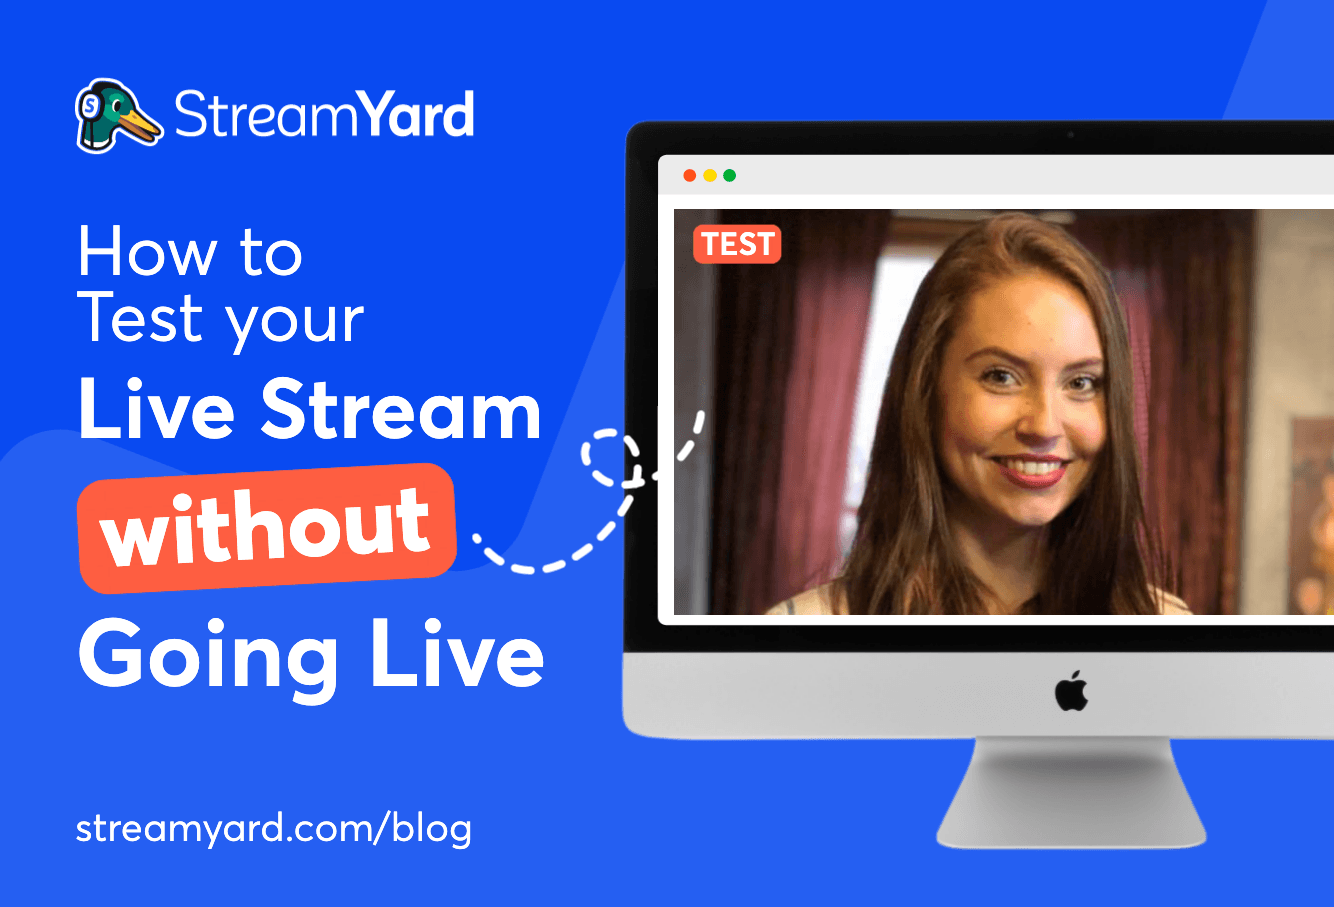 Want to make sure your live stream looks great before you go live? Here's how to run a test live stream without actually streaming.